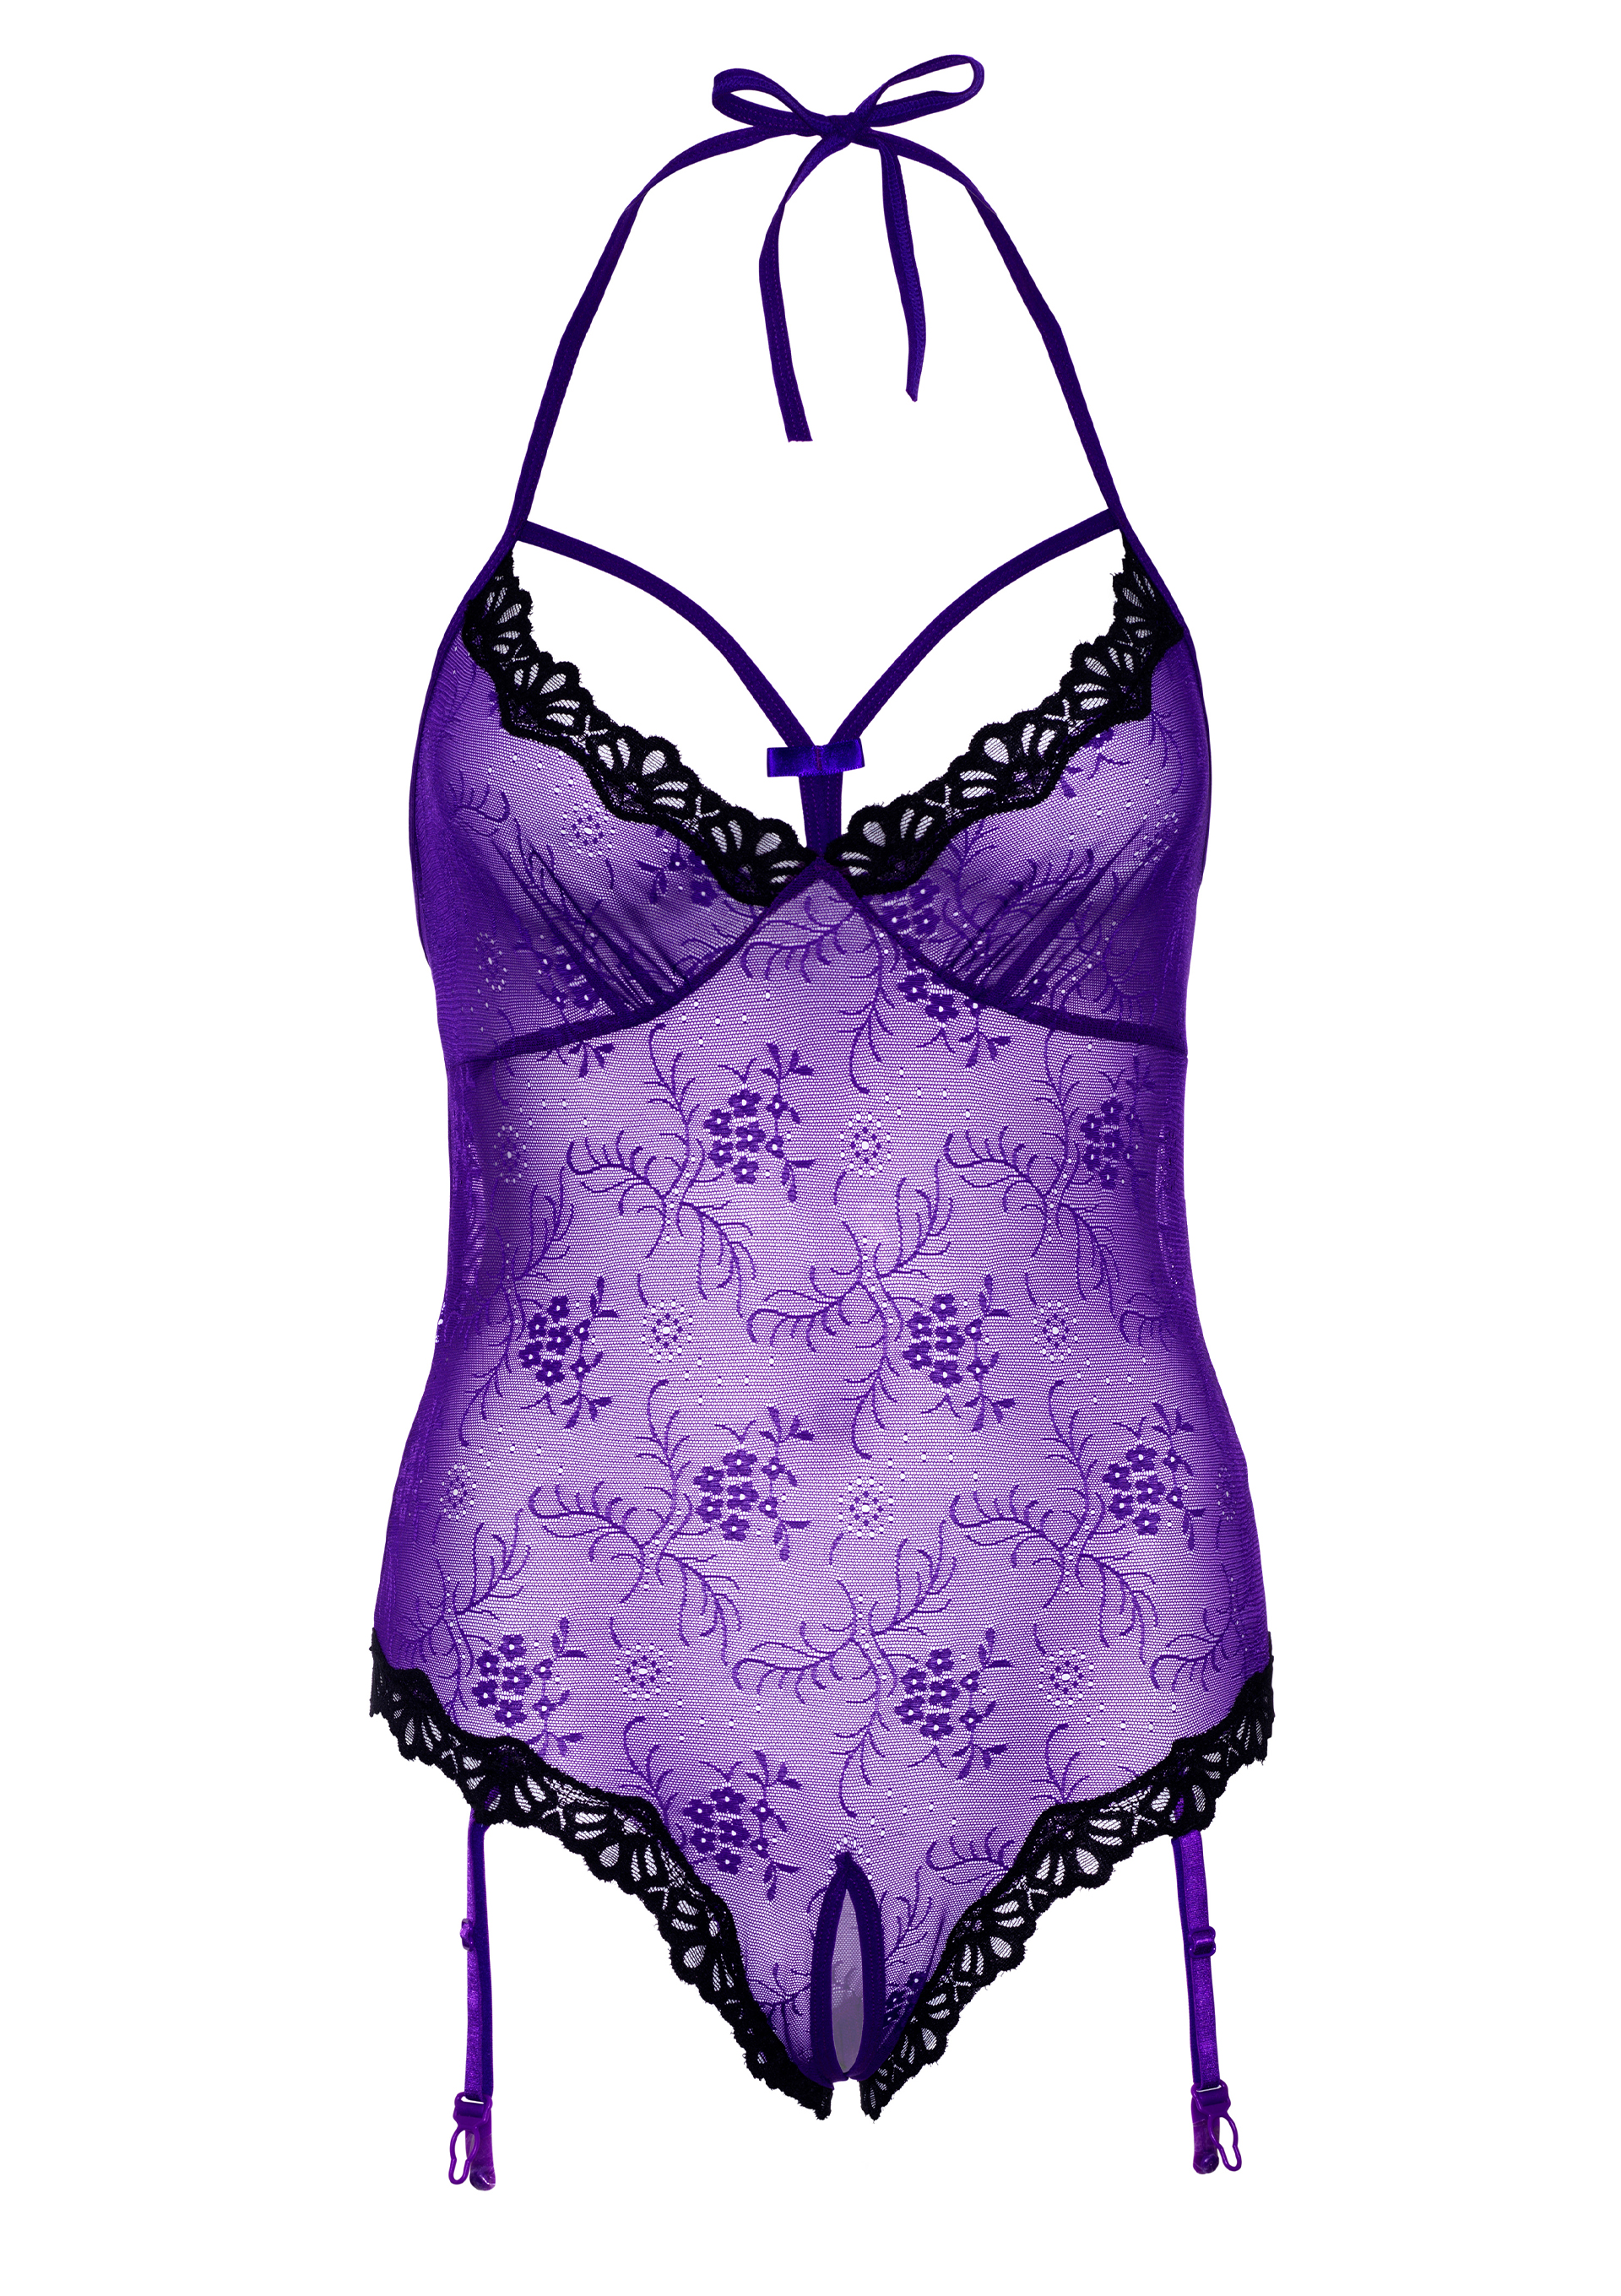 Daring - Daring Lace Teddy with Open Crotch